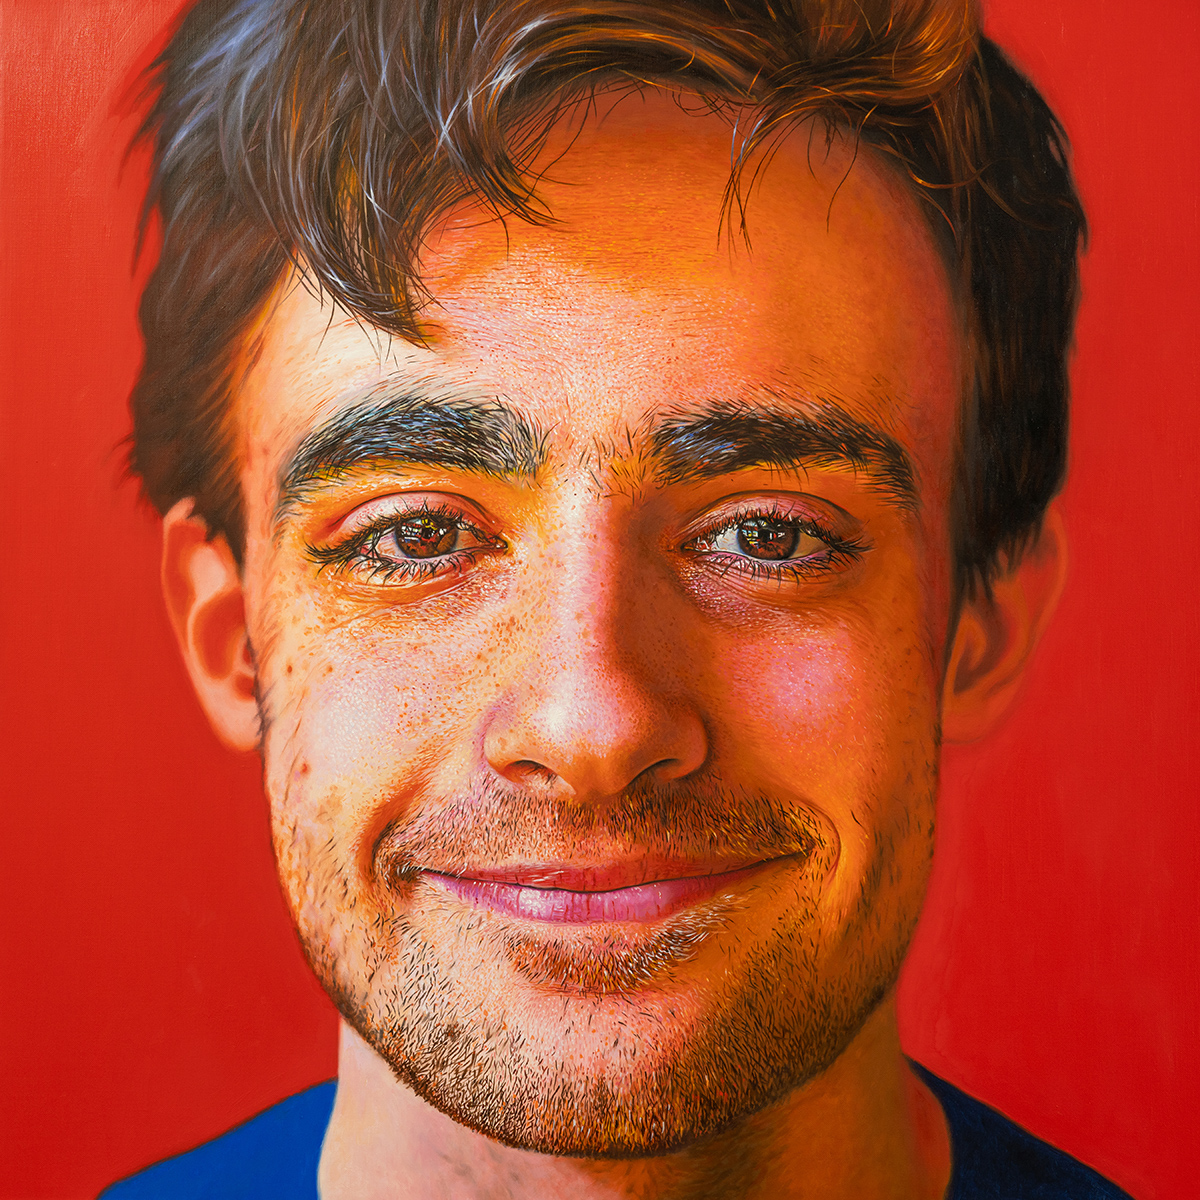 oil painting of realistic human face of a man with scruff on his chin and surrounding lips. Red background color